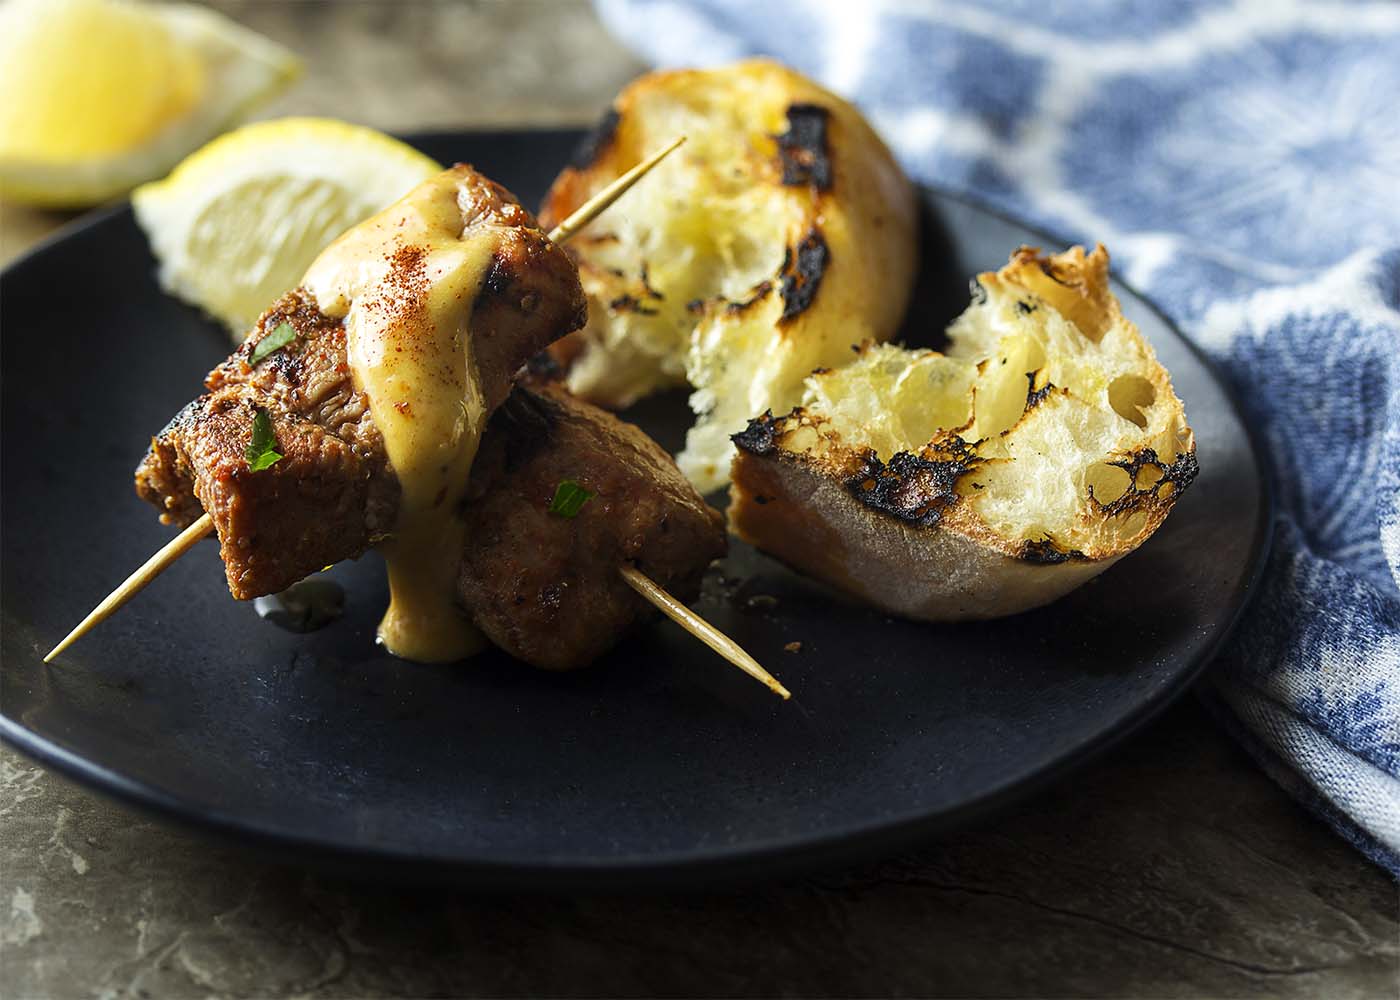 Two skewers of pinchos morunos with aioli dripping down them and grilled bread to mop up the sauce.